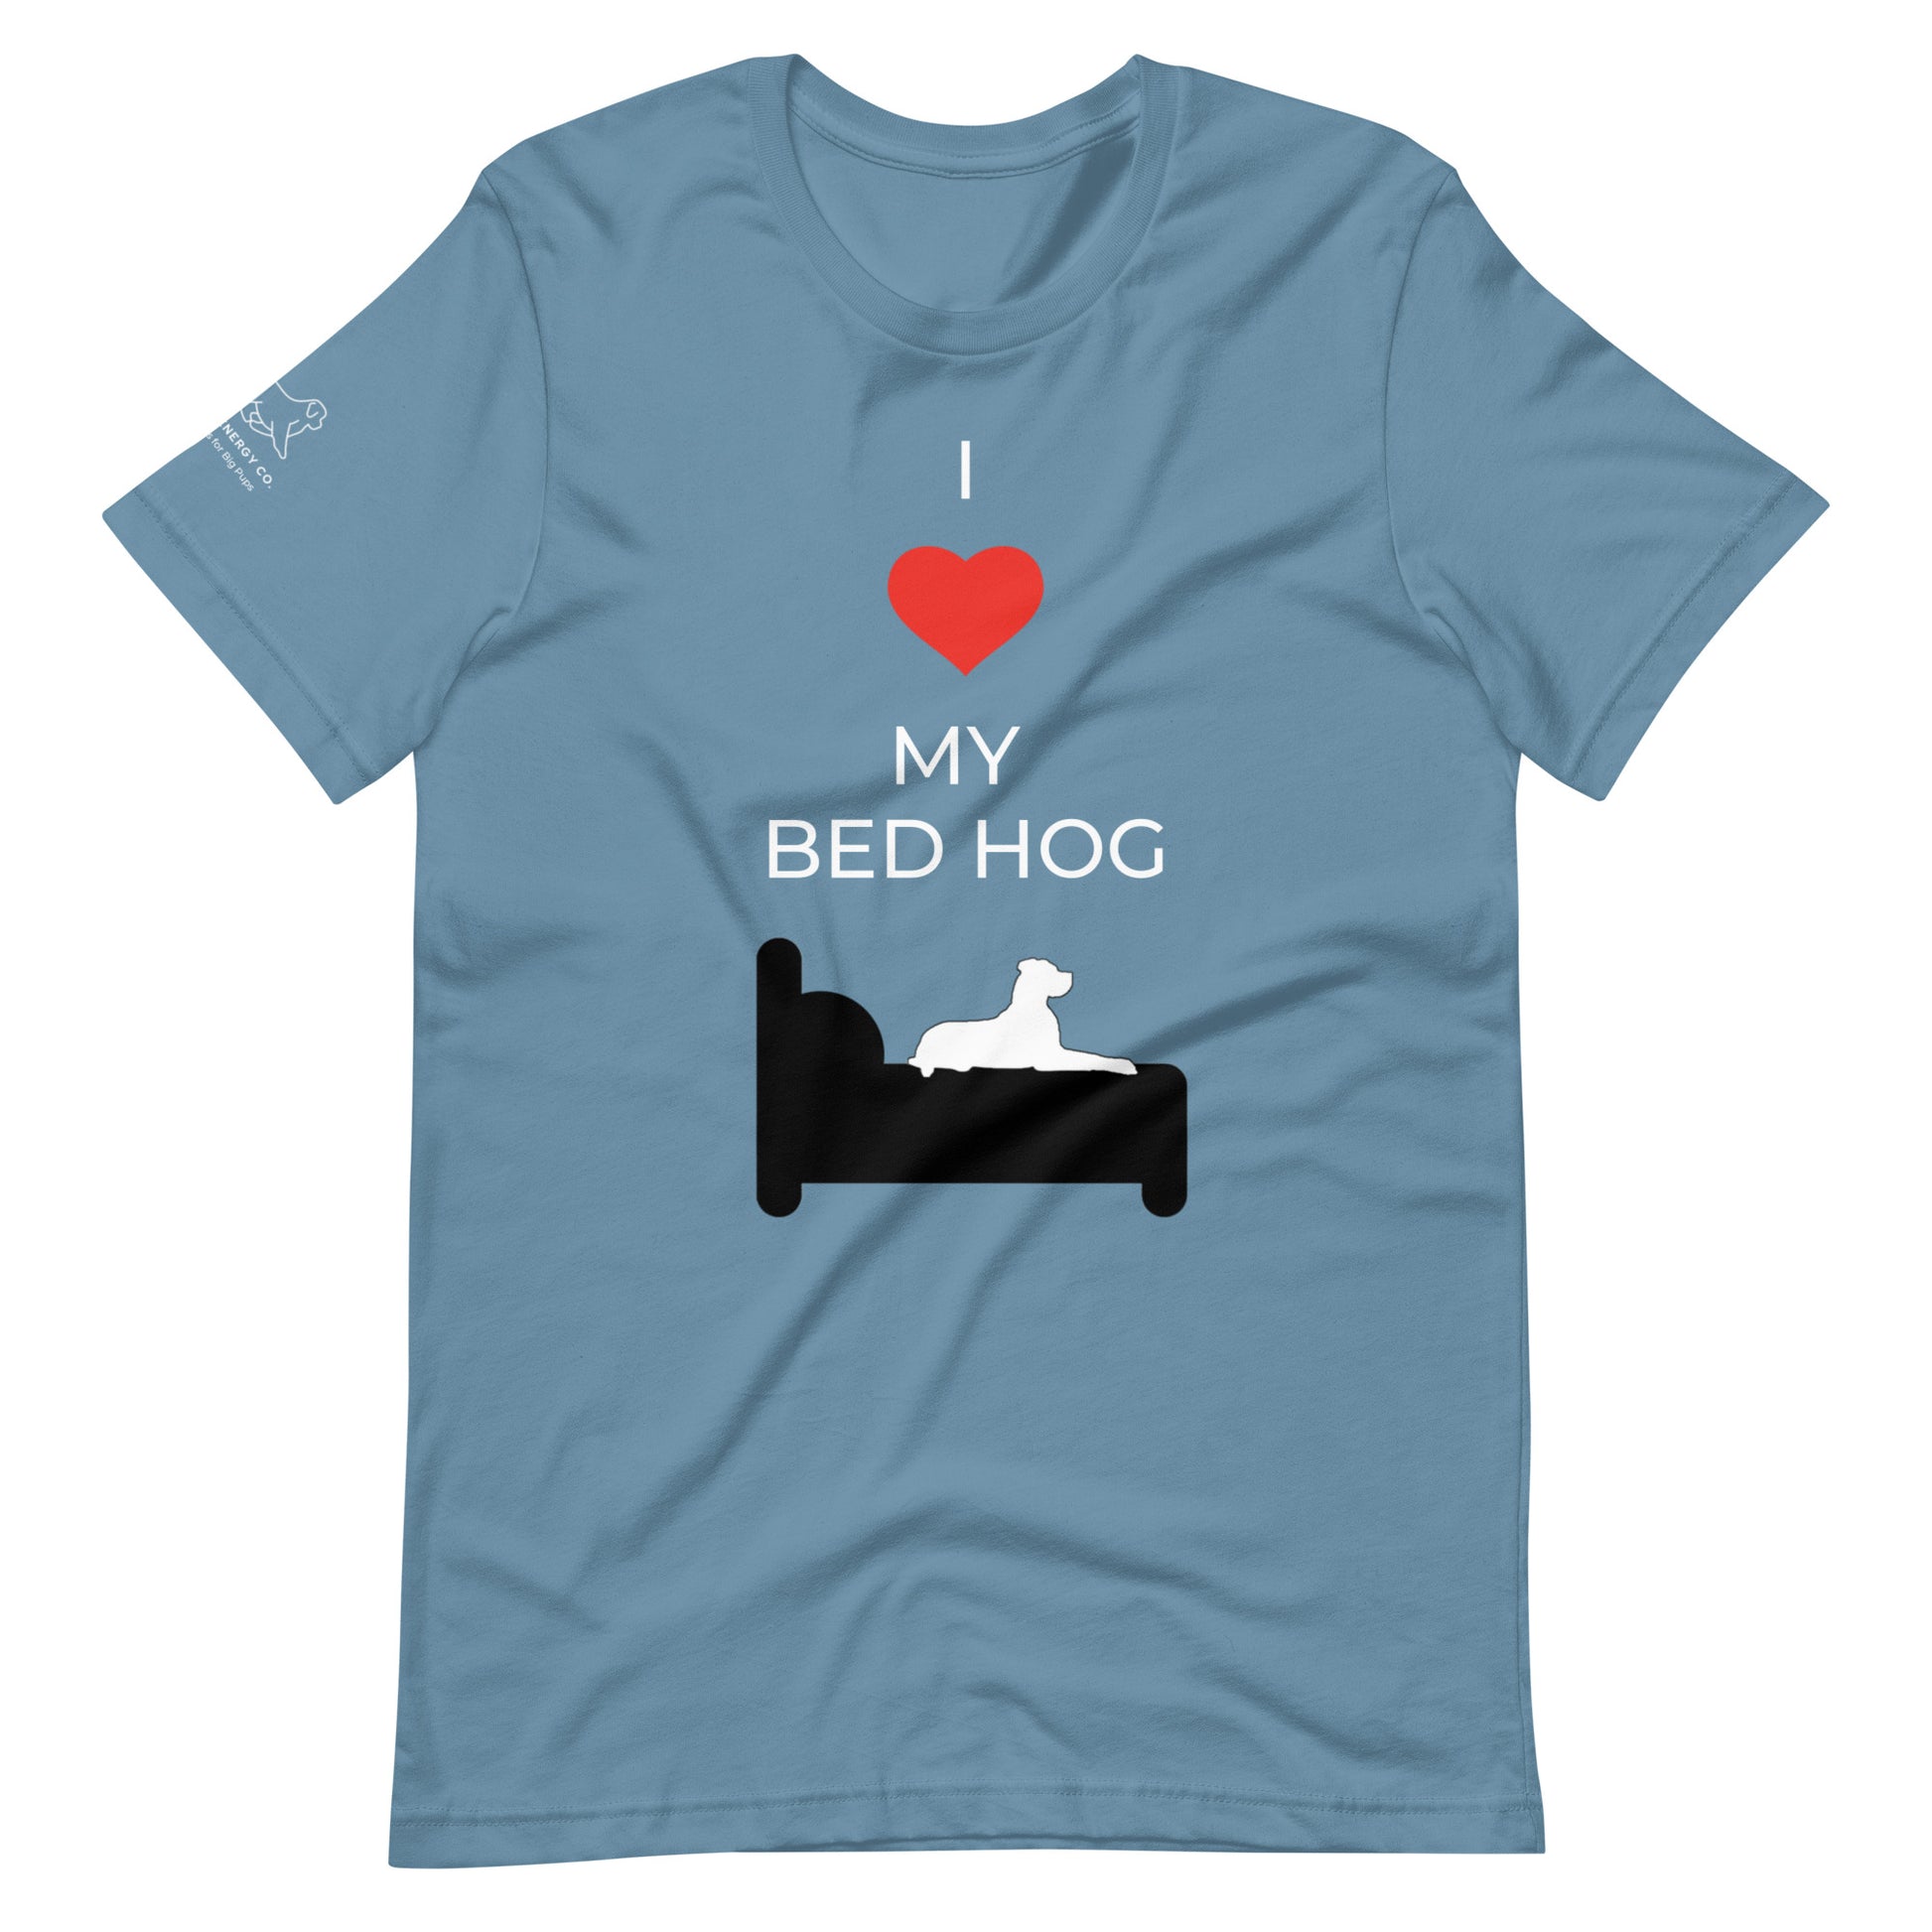 Front of a steel blue t-shirt that reads "I love my bed hog" in white text over an illustration that is the white silhouette of a large dog laying on the dark silhouette of a bed. The word "love" is replaced by a red heart symbol.